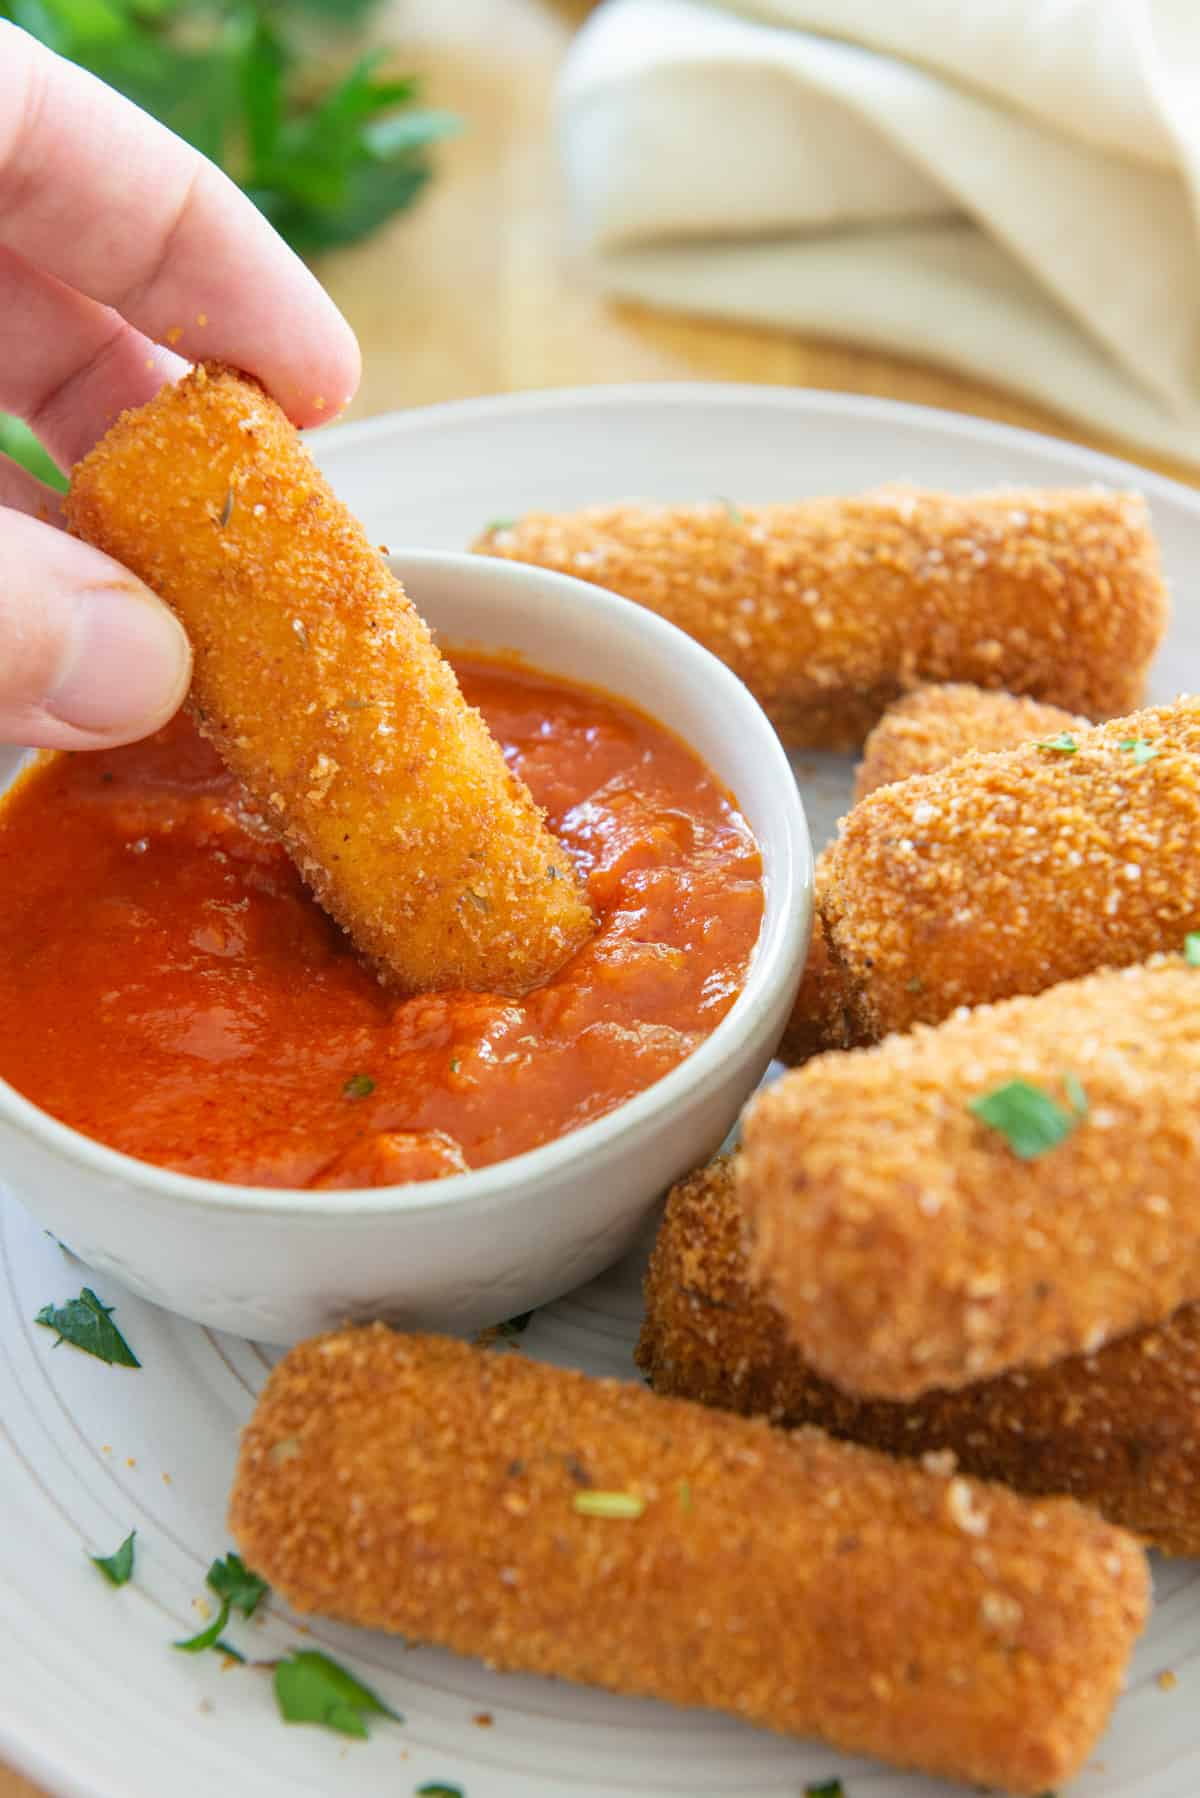 How Long are Cheese Sticks Good For? 